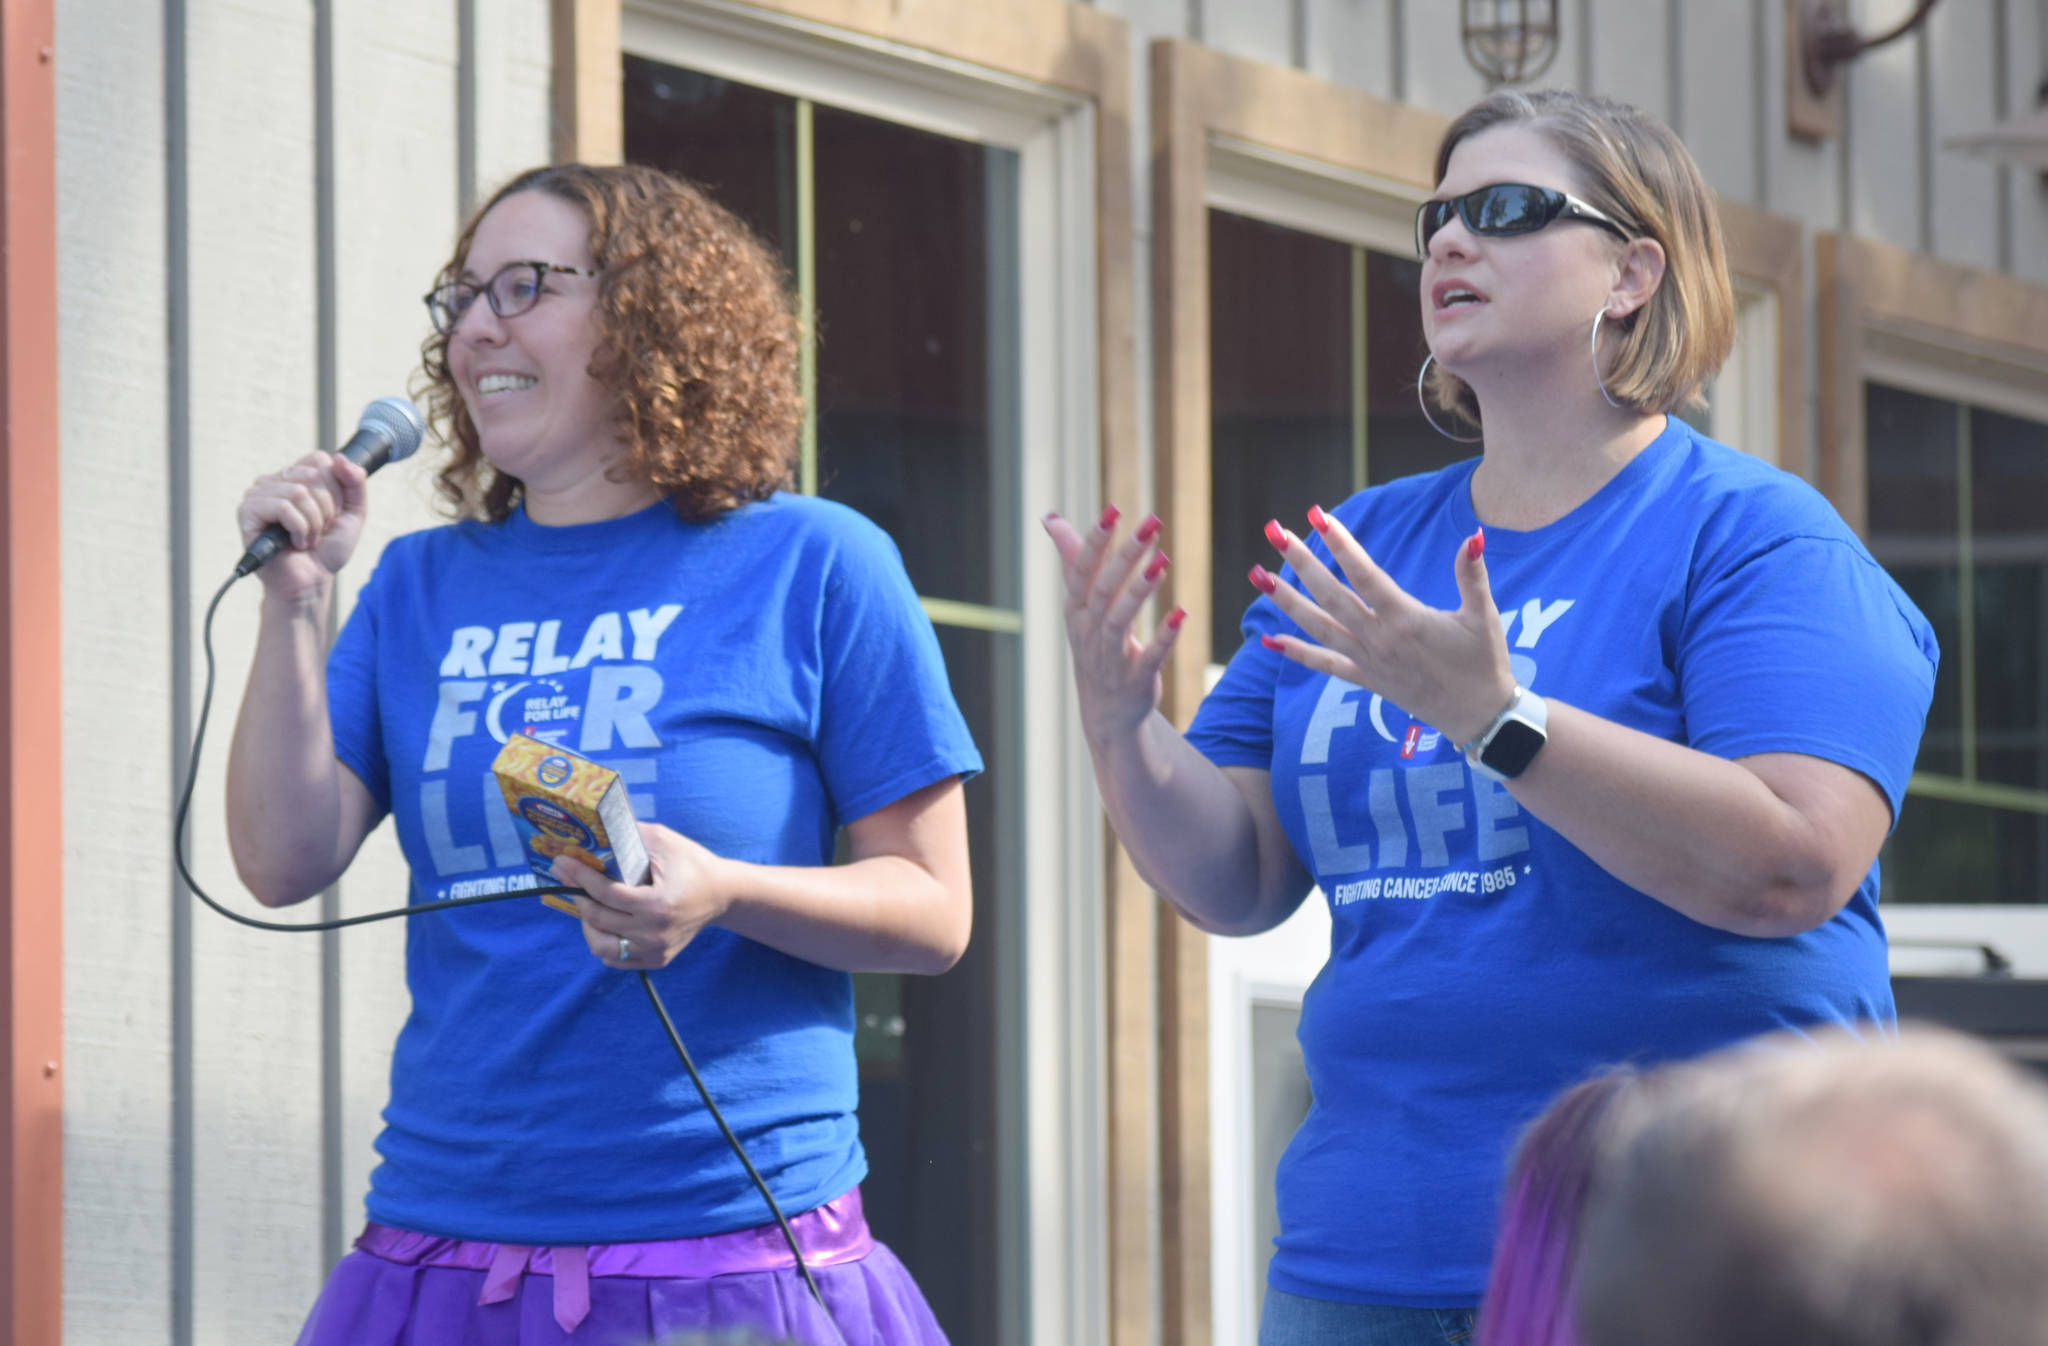 Alana Martin and Johna Beech of Kenai Penisula Relay For Life address runners before the start of the Brewery to Bathroom .5K “The race for the rest of us” on Sunday, Aug. 11, 2019, in Soldotna, Alaska. (Photo by Jeff Helminiak/Peninsula Clarion)